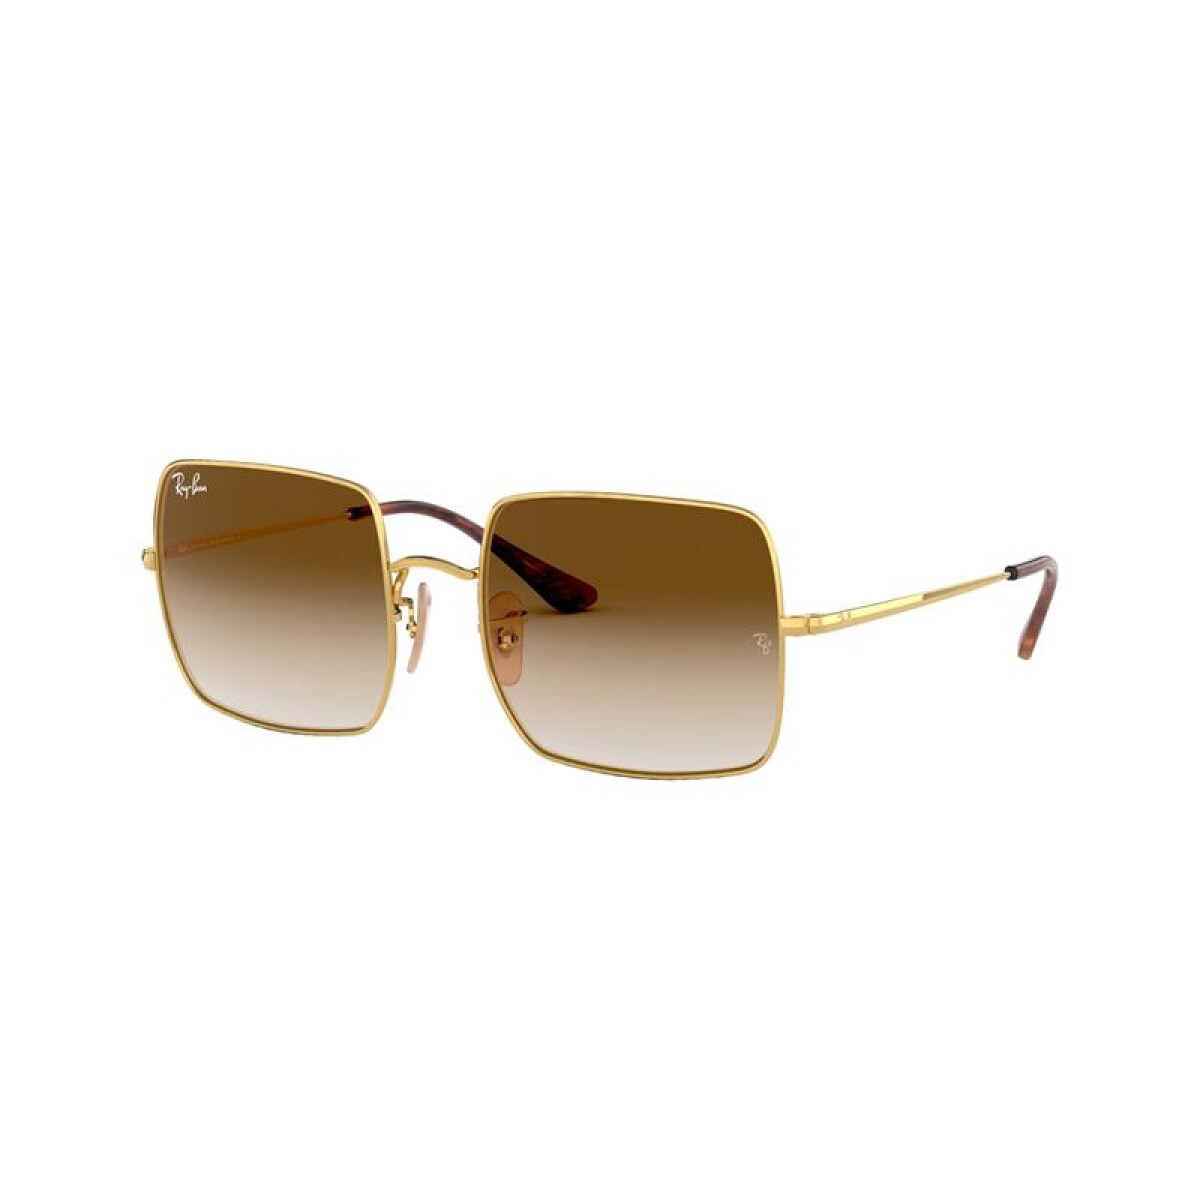 Ray Ban Rb1971l Square - 9147/51 